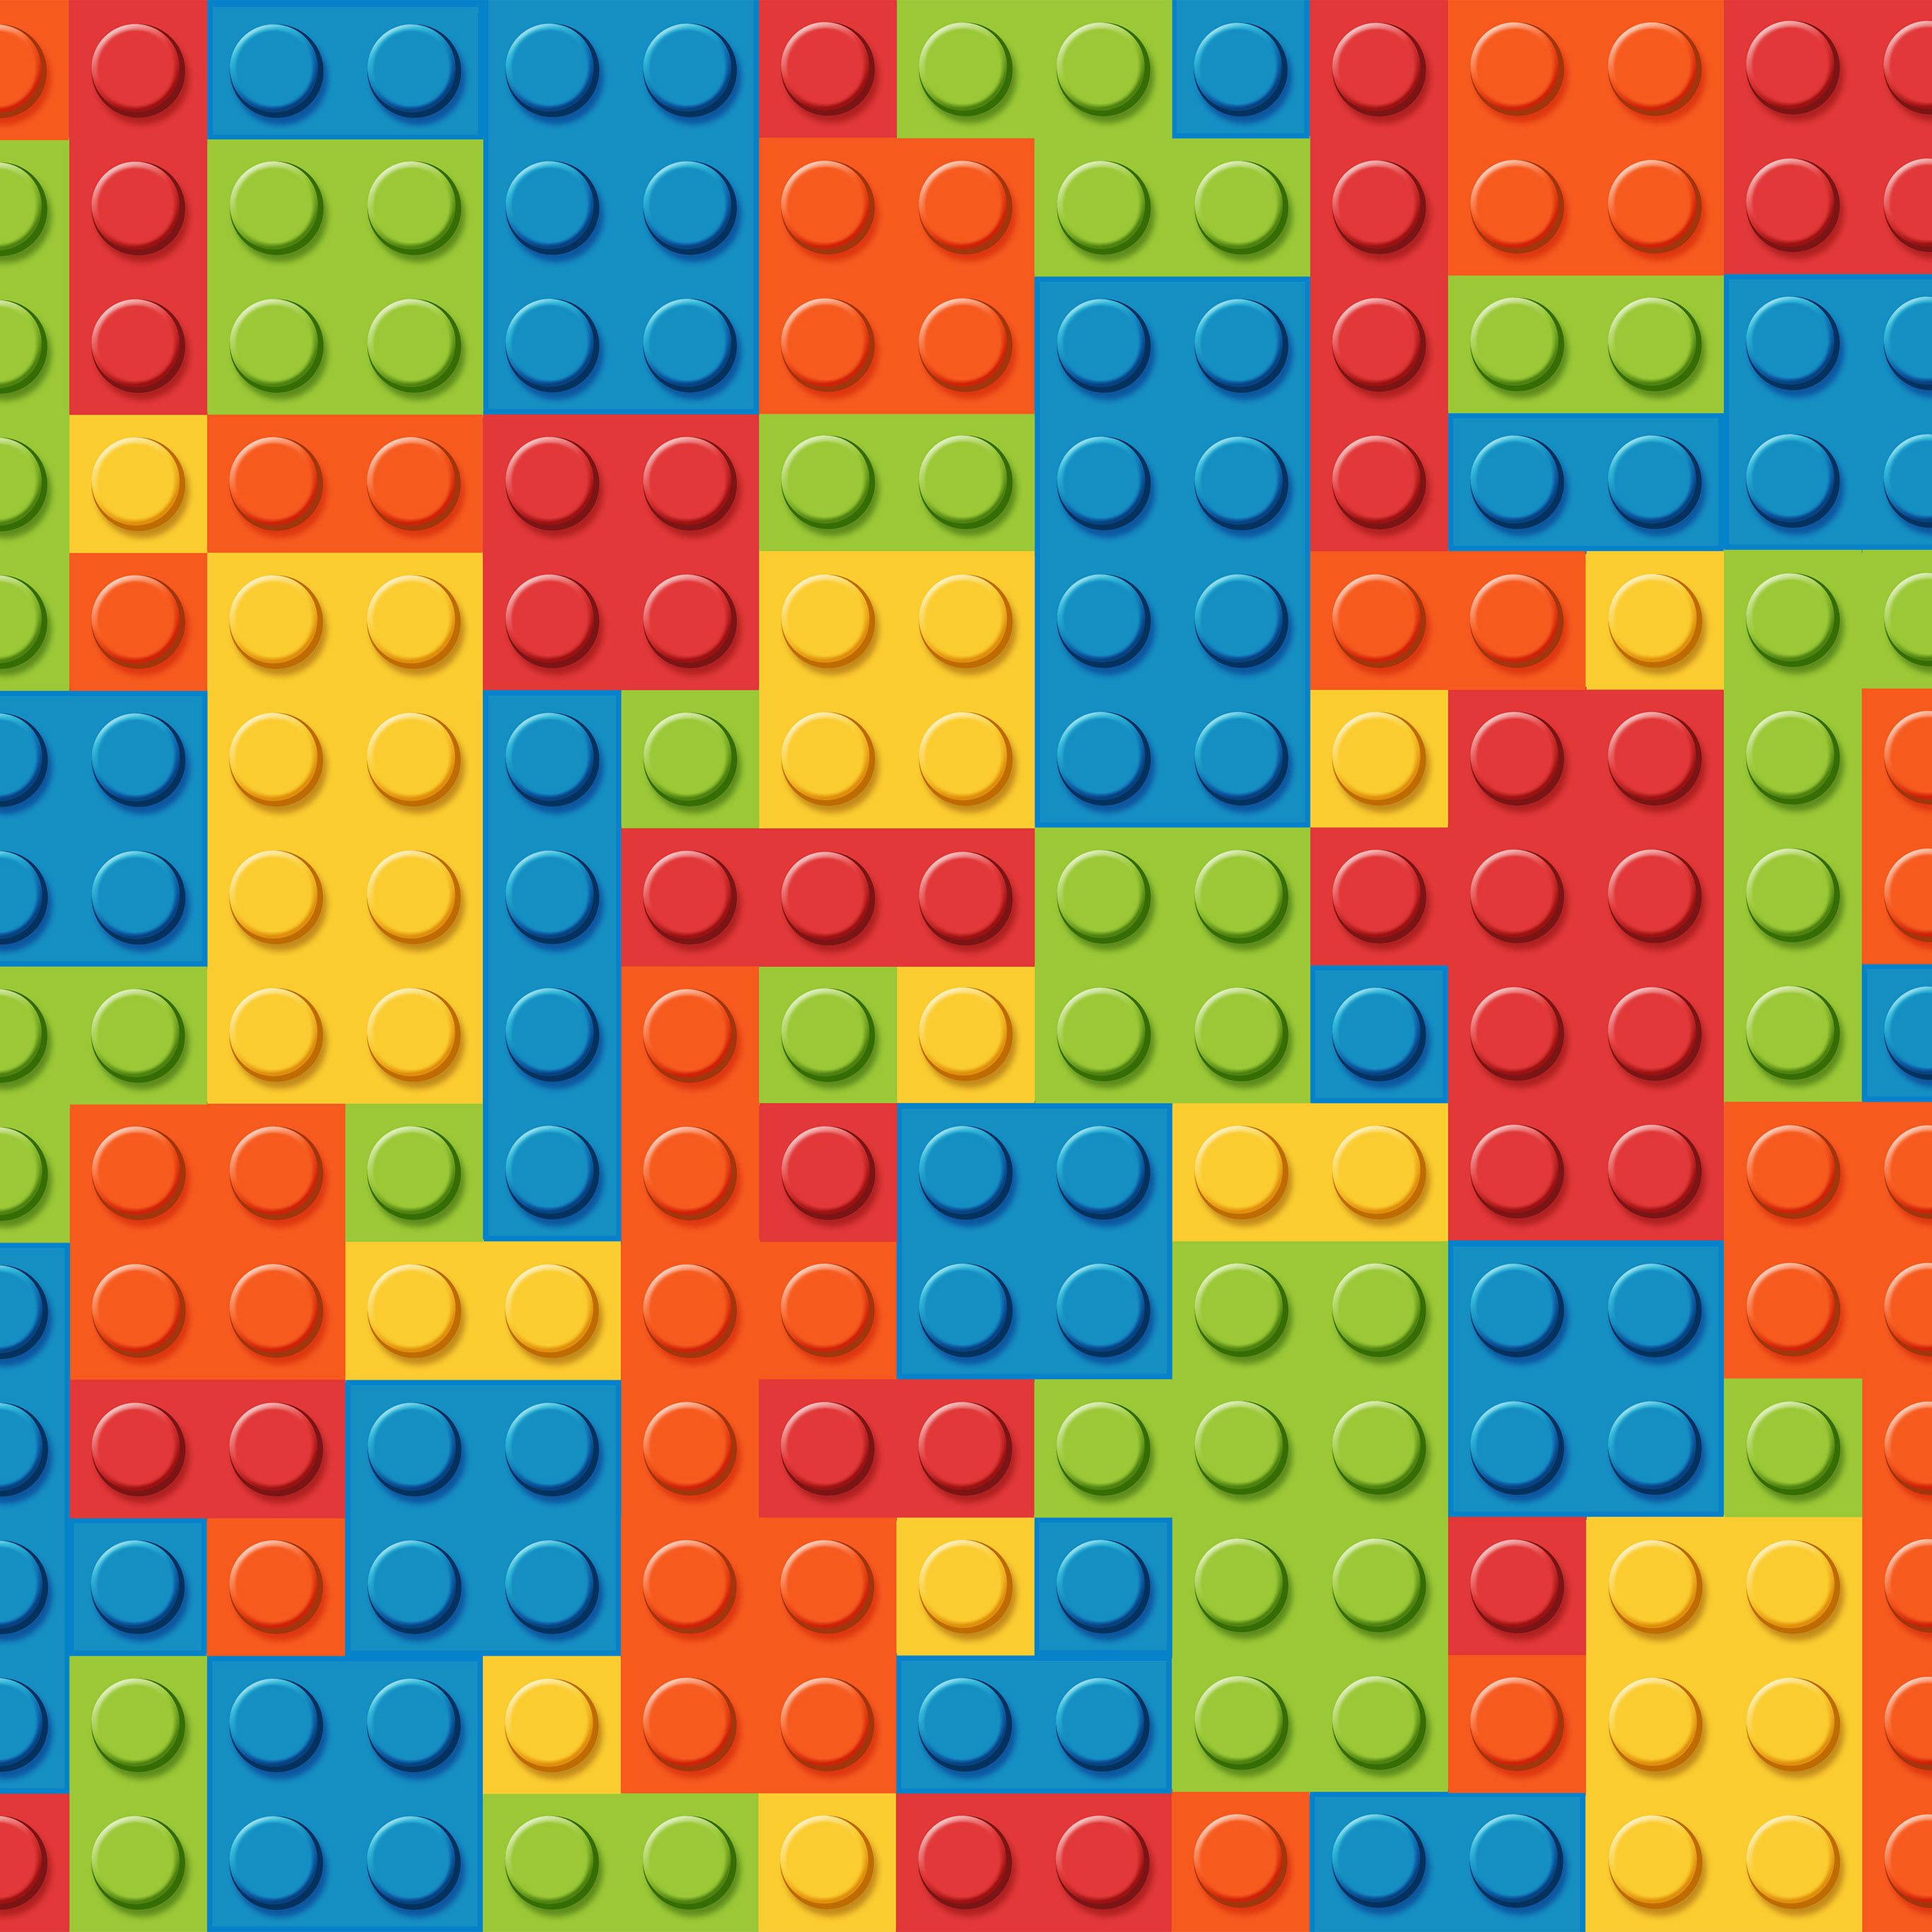 LEGO Wallpapers.